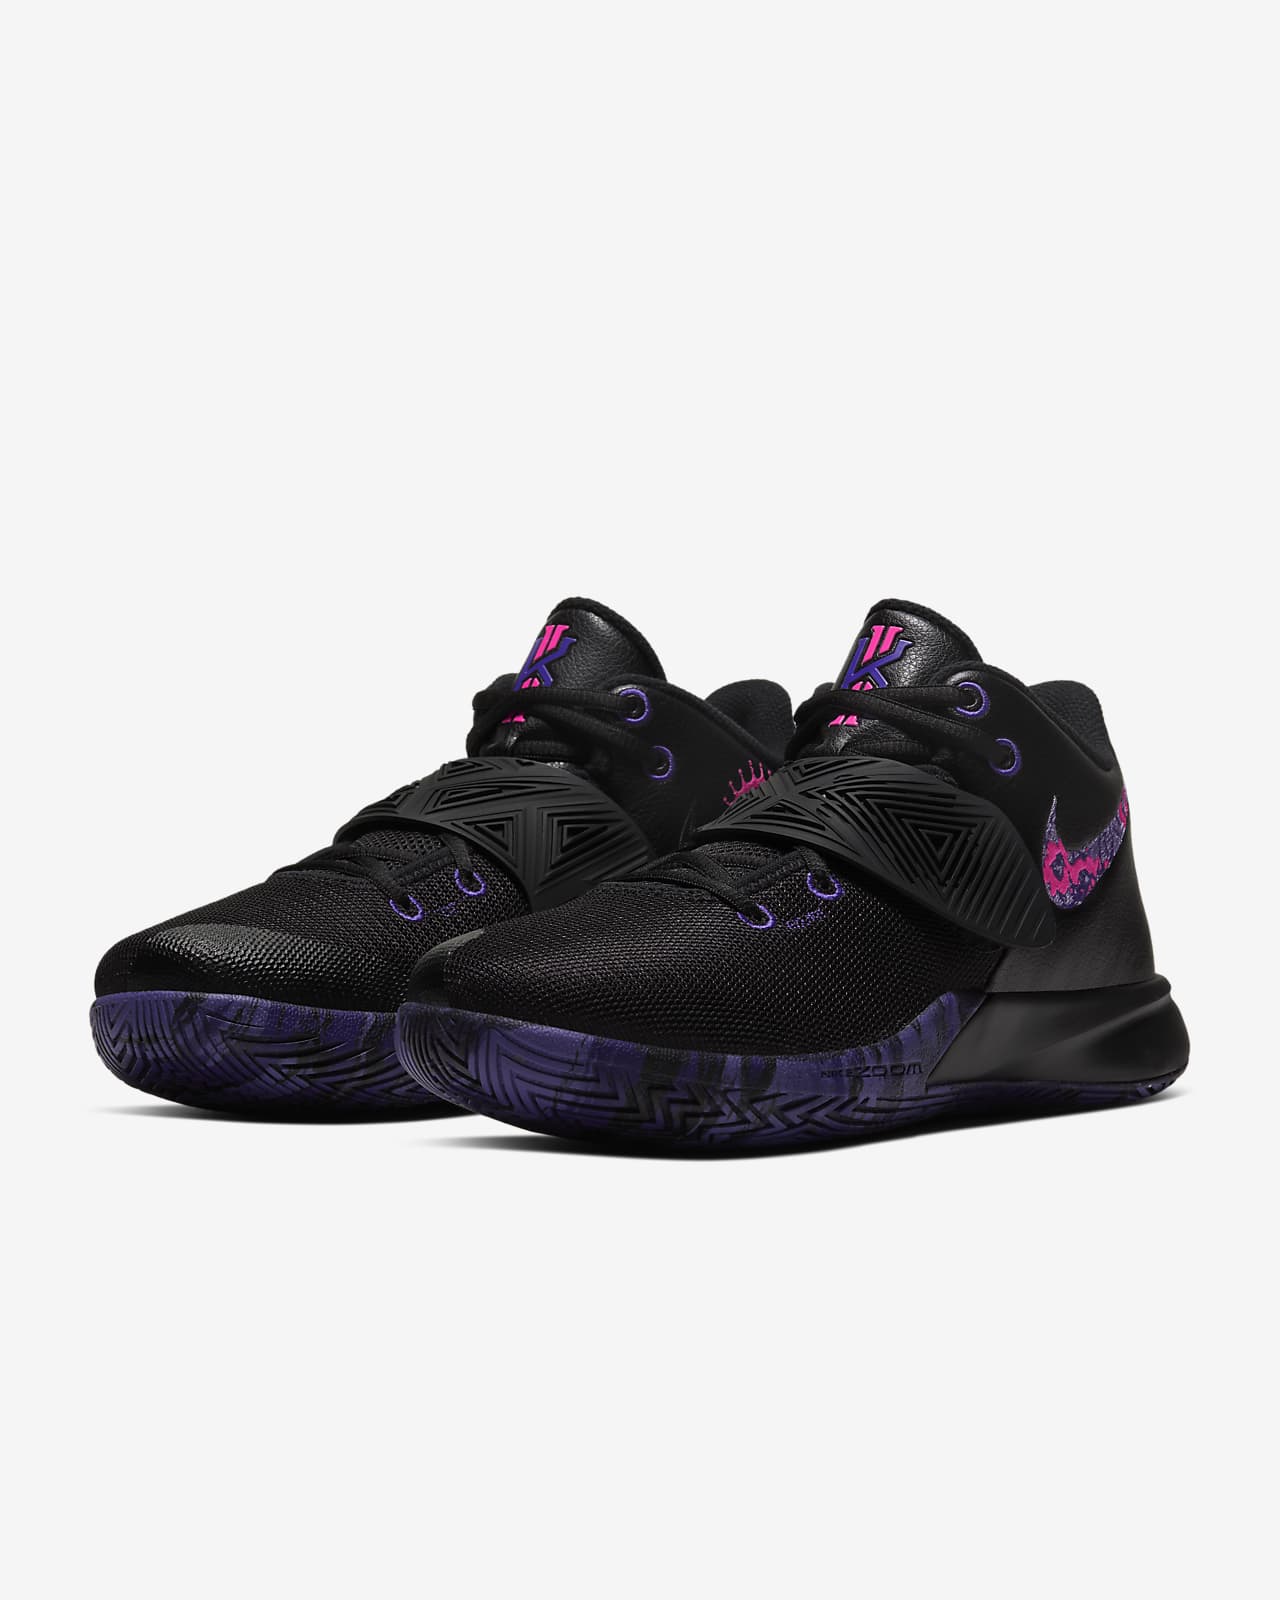 kyrie 3 shoes price in india